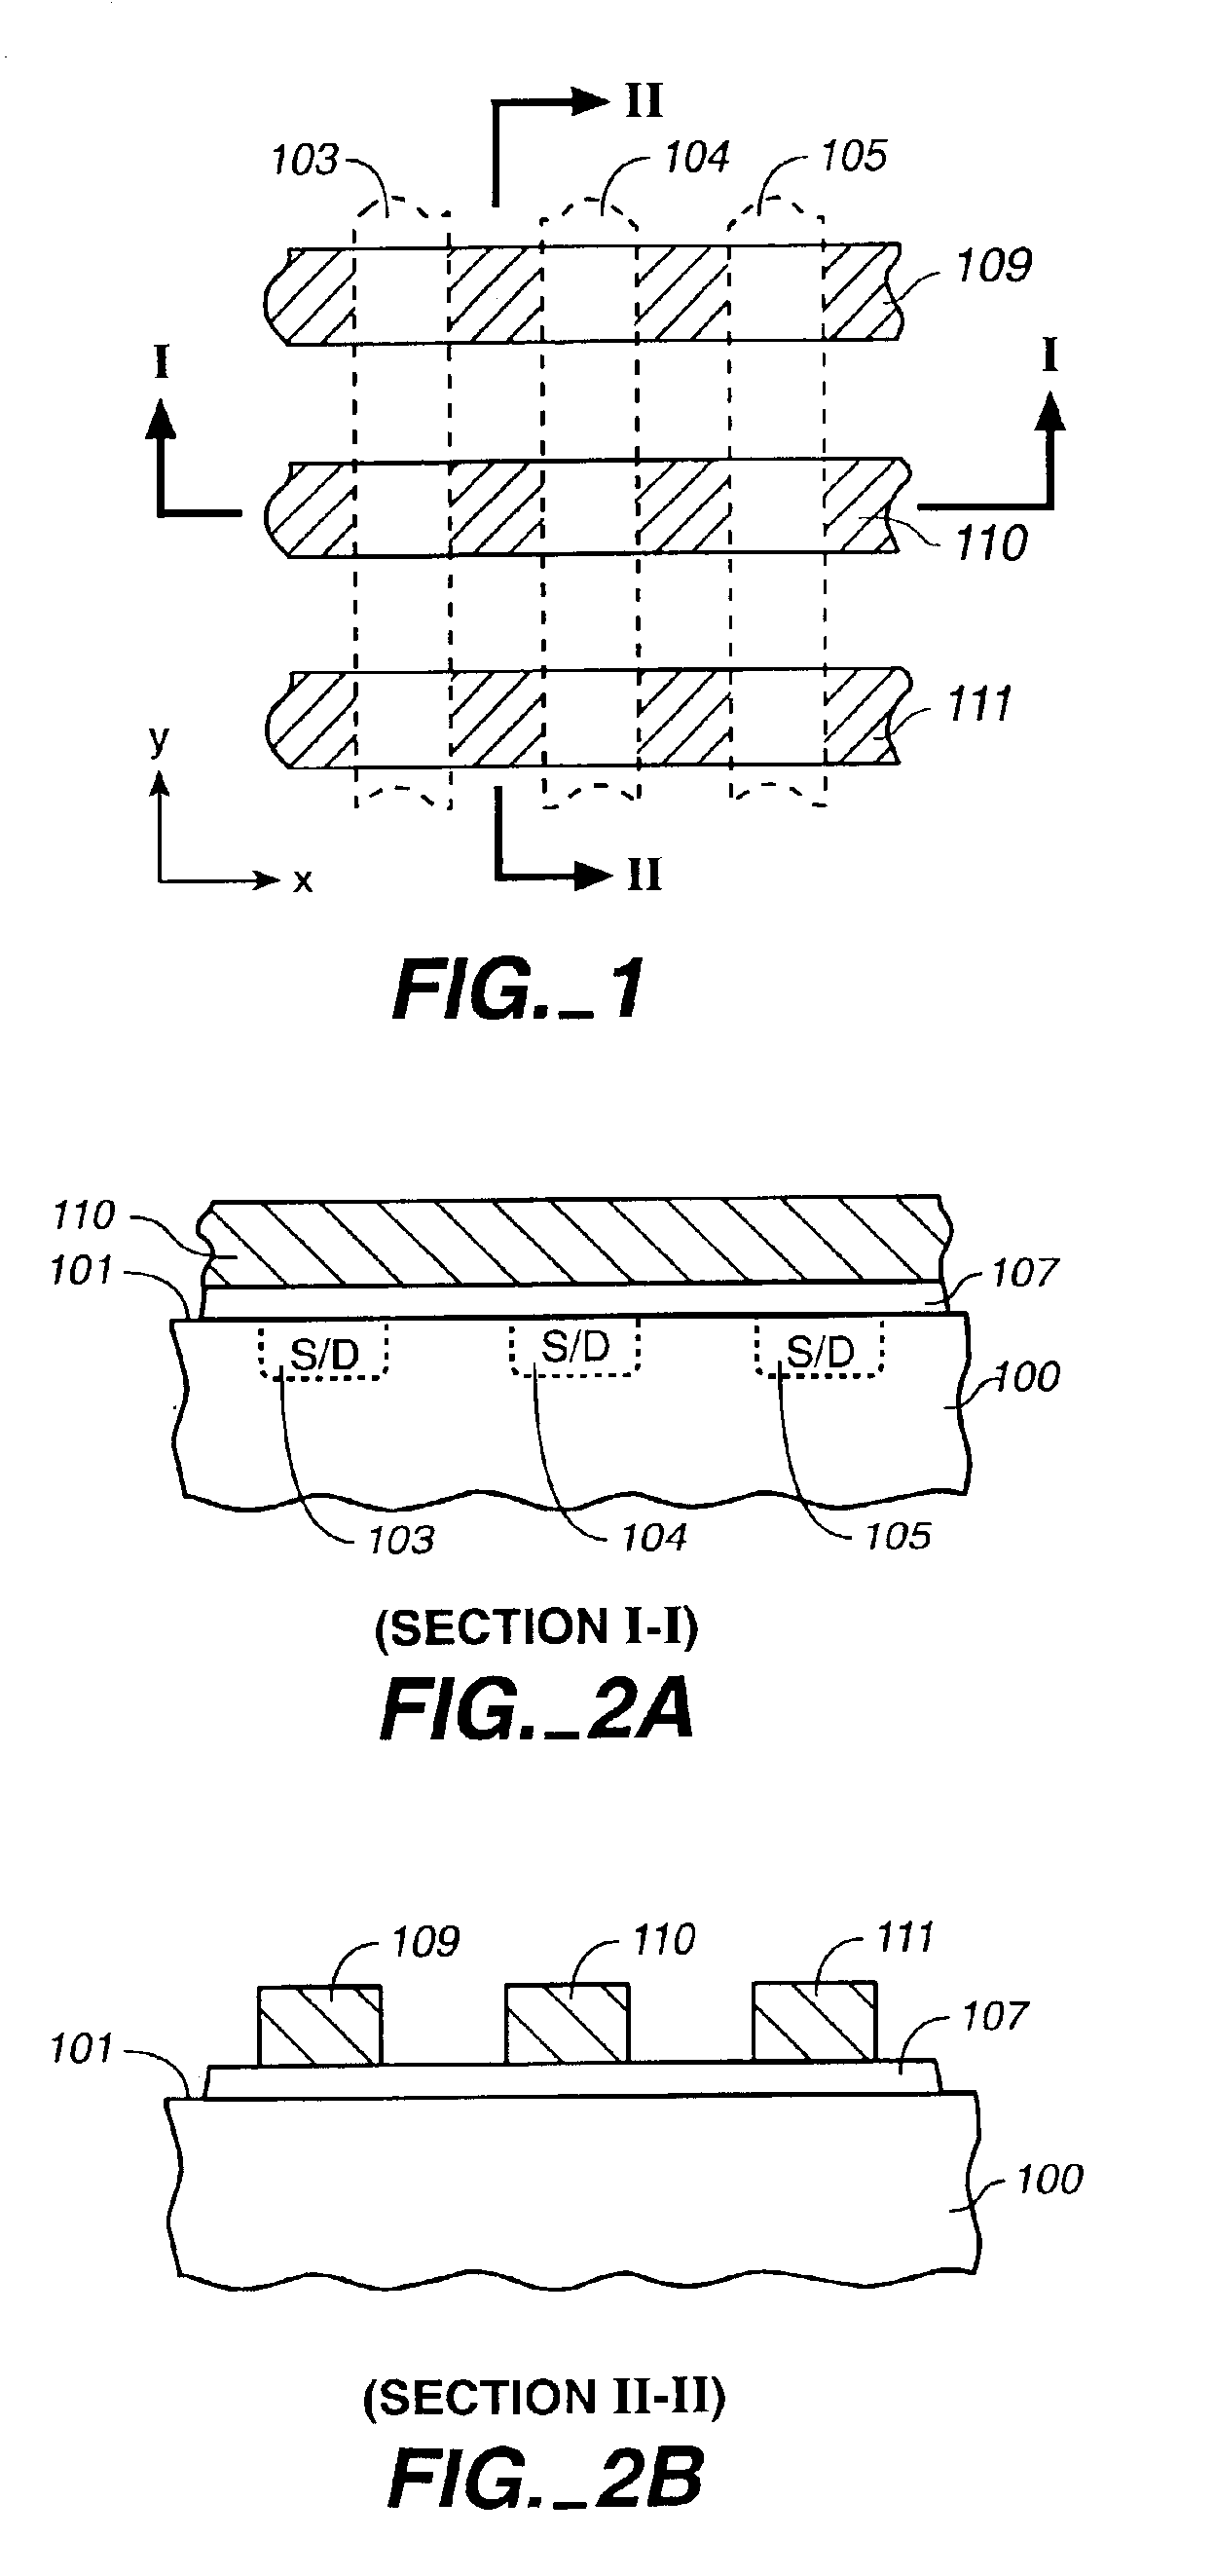 Multi-state non-volatile integrated circuit memory systems that employ dielectric storage elements